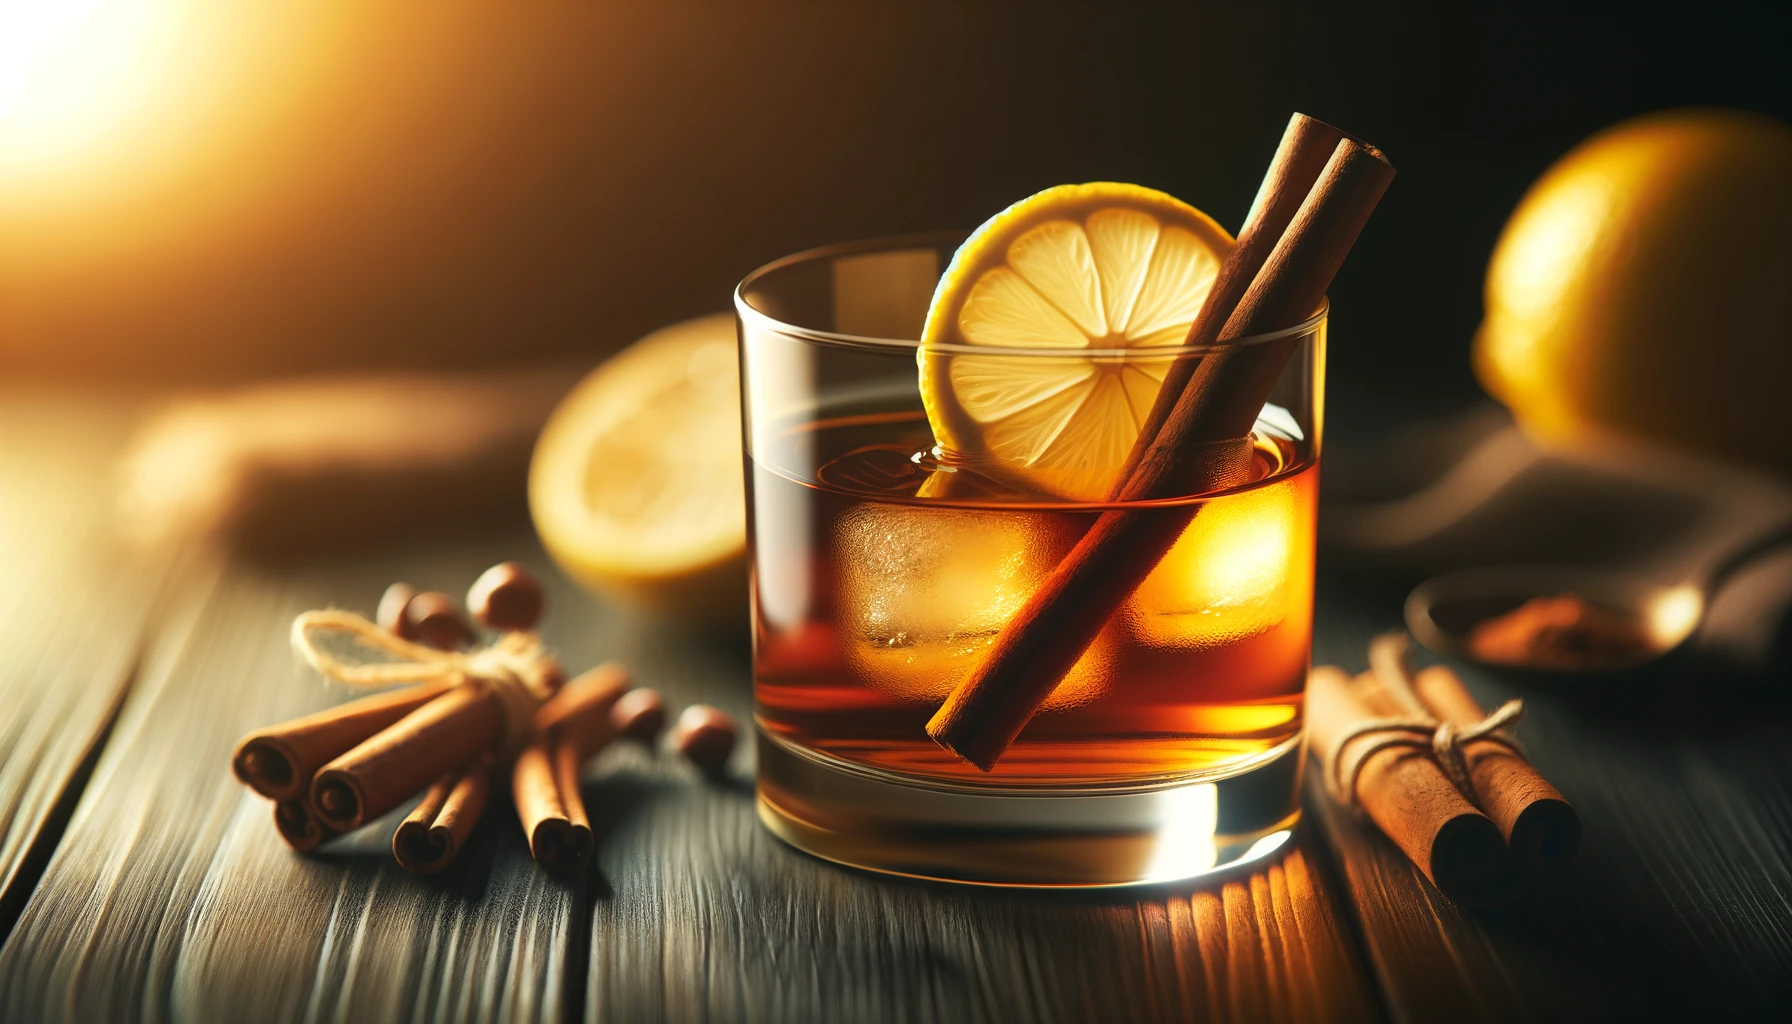 A festive version of the traditional whisky sour with a hint of spice.